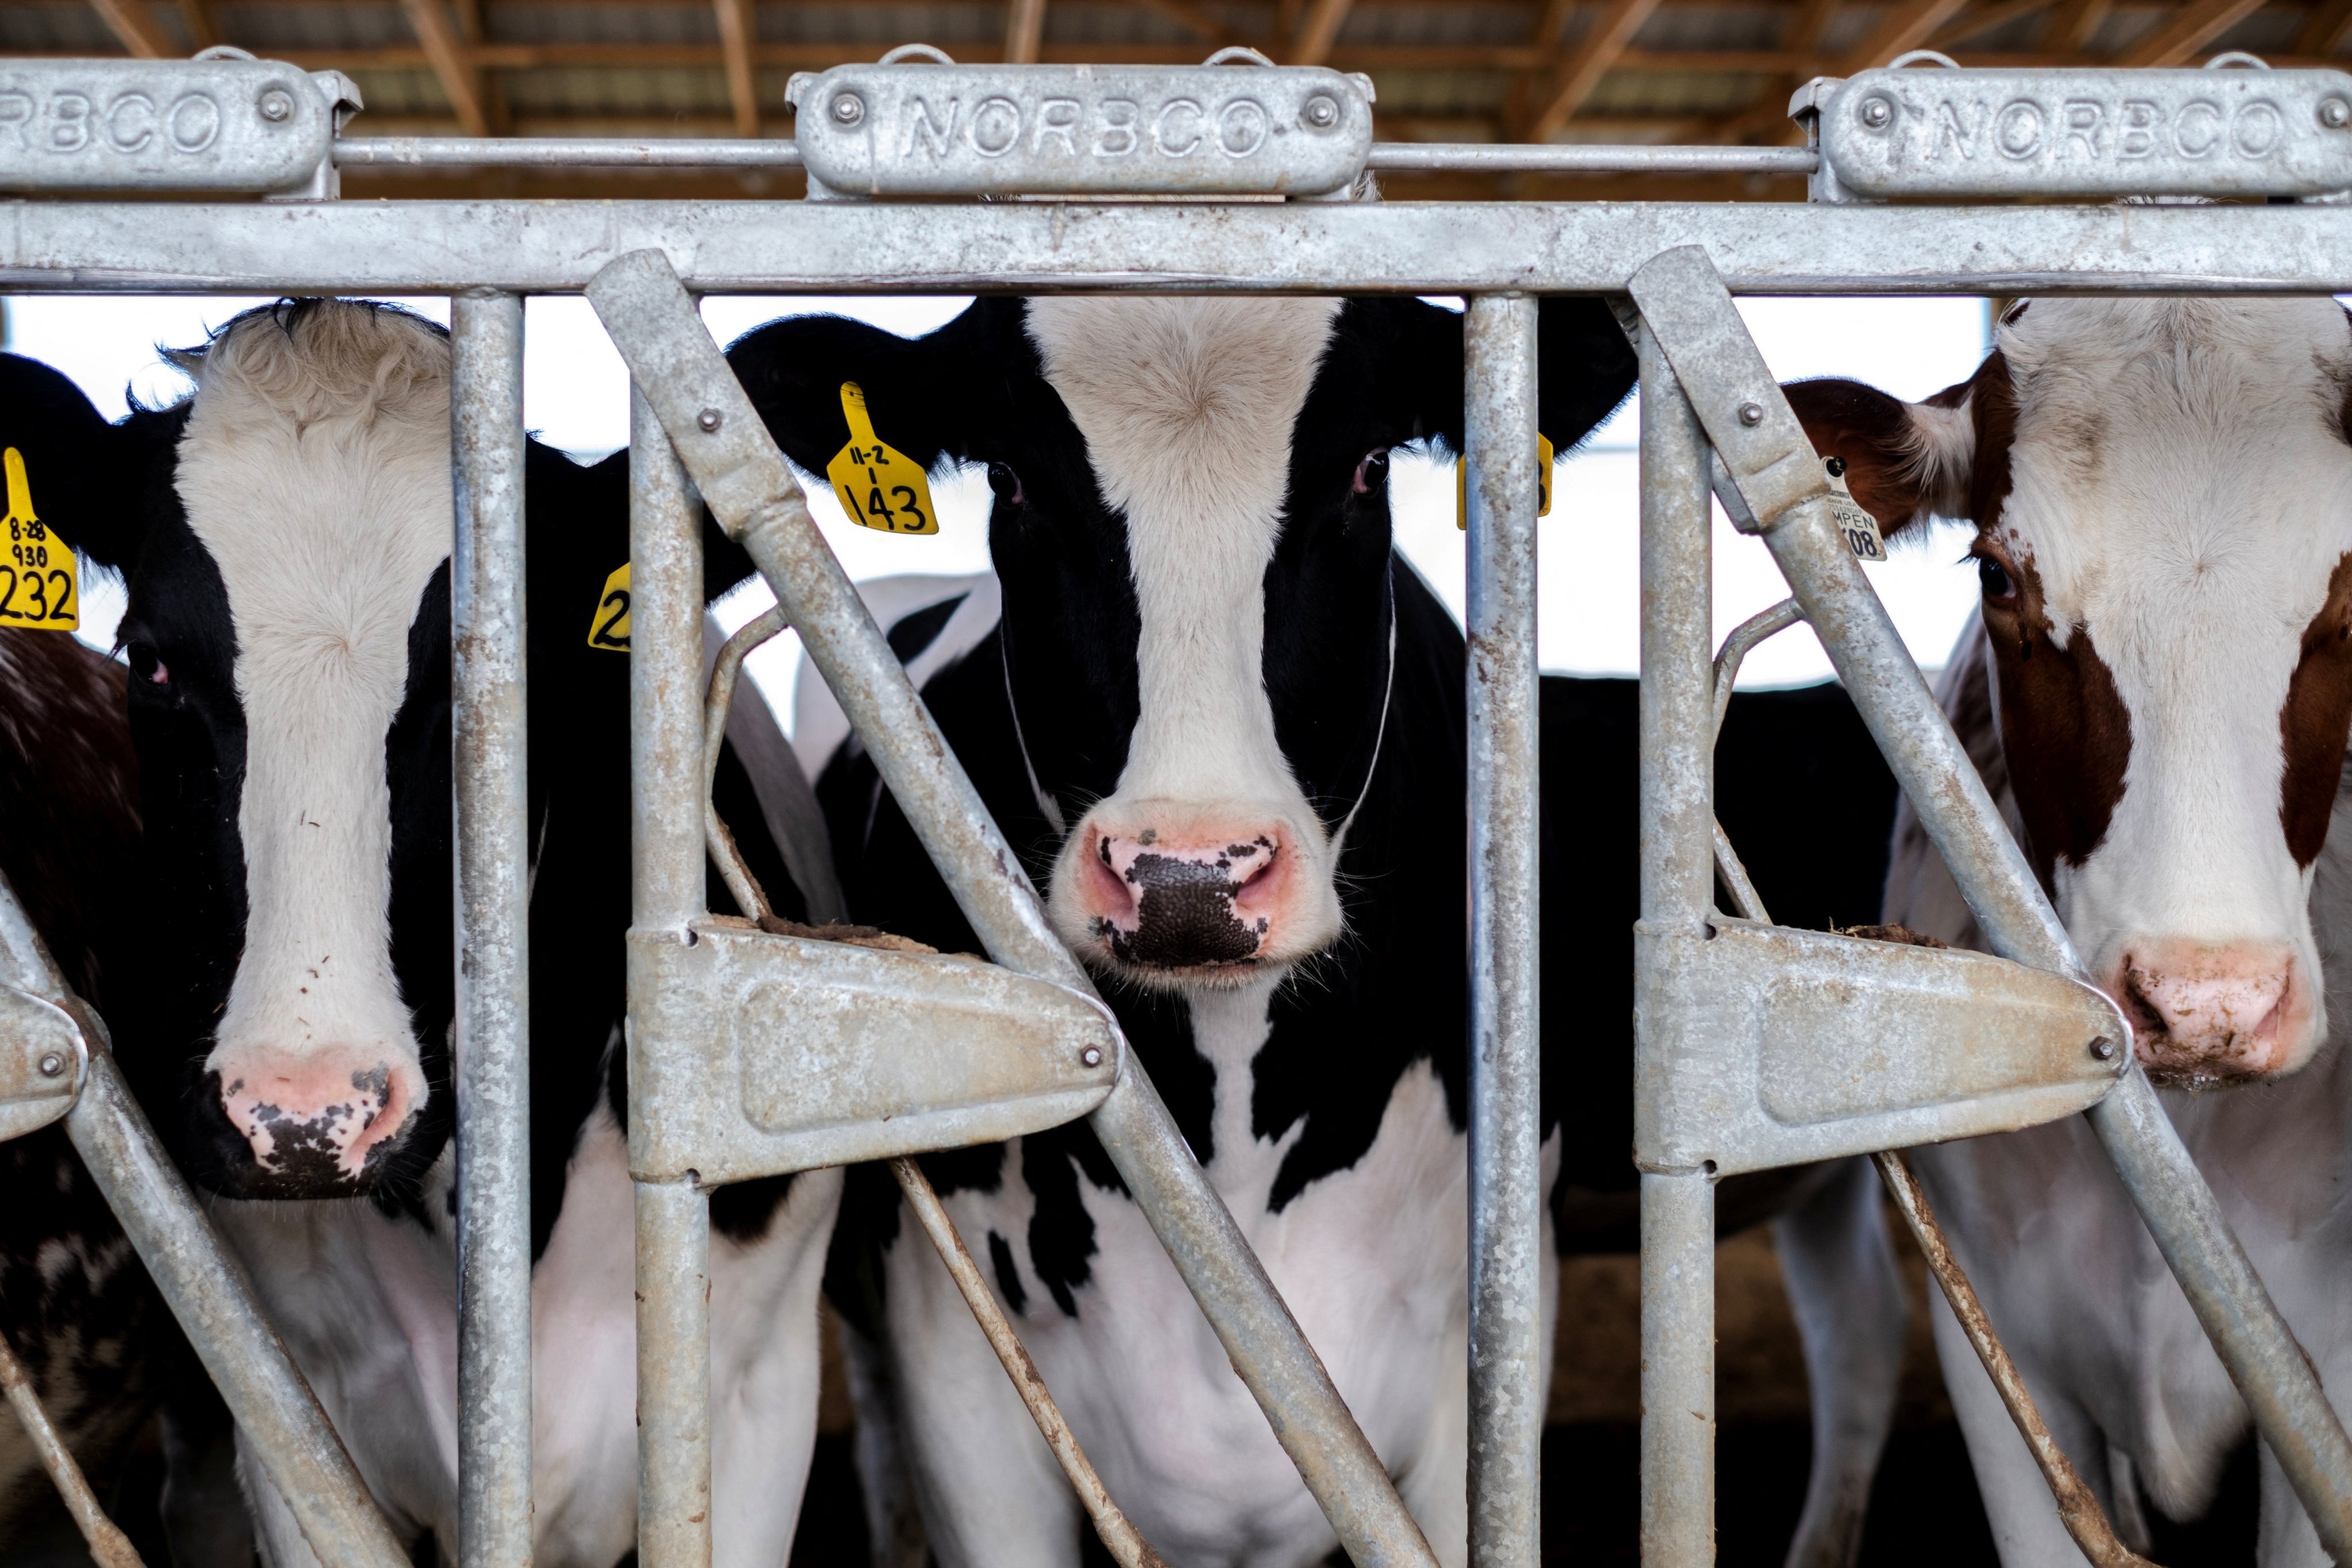 Health officials have said that cattle infections do not present a concern for the commercial milk supply, as dairies are required to destroy milk from sick cows. Photo: Reuters